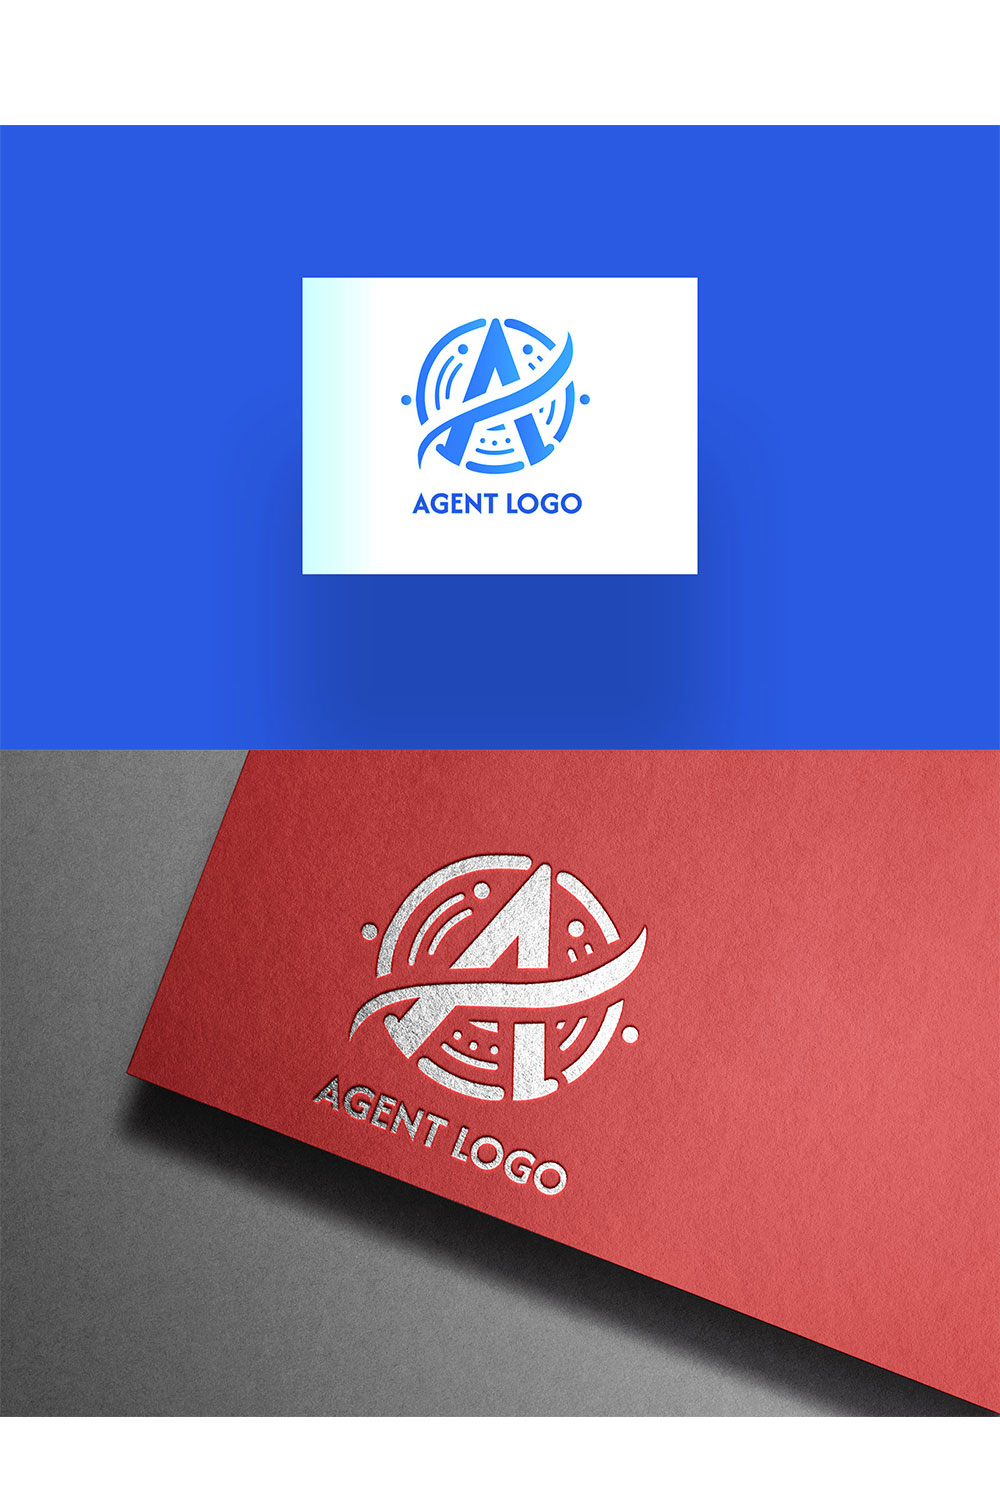 A Letter Logo Show of Agent pinterest preview image.